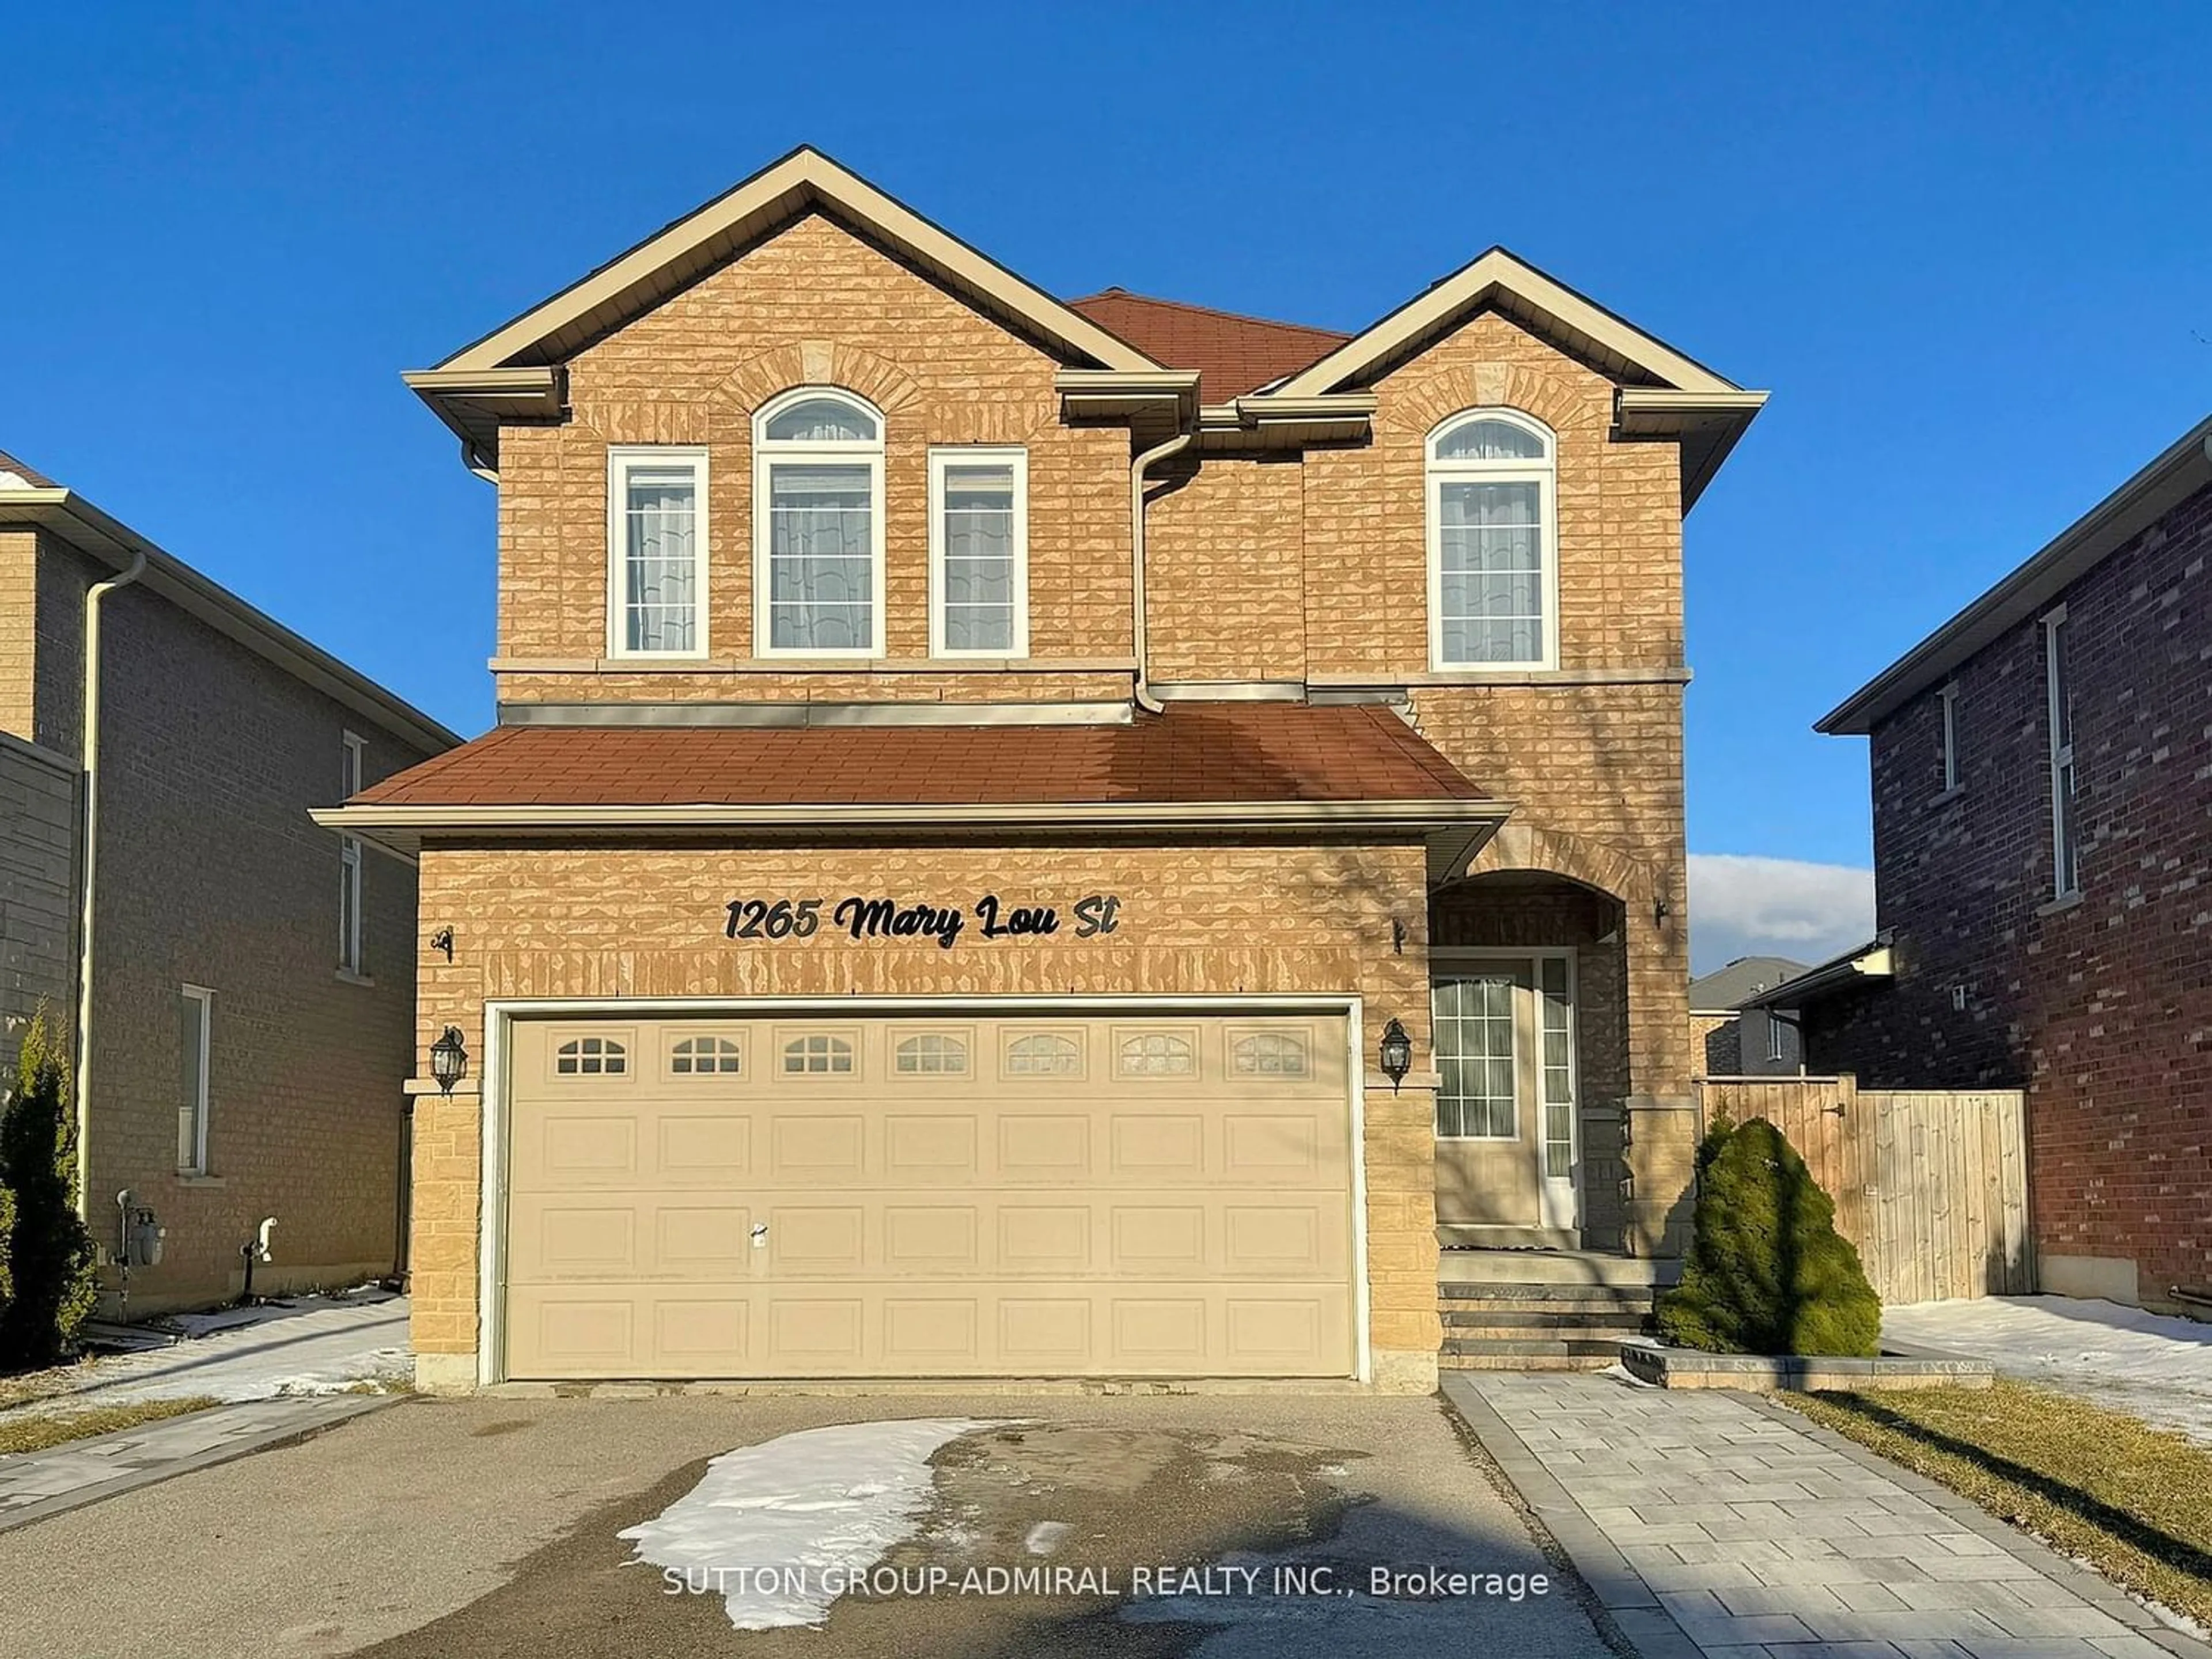 Home with brick exterior material for 1265 Mary Lou St, Innisfil Ontario L9S 0C2